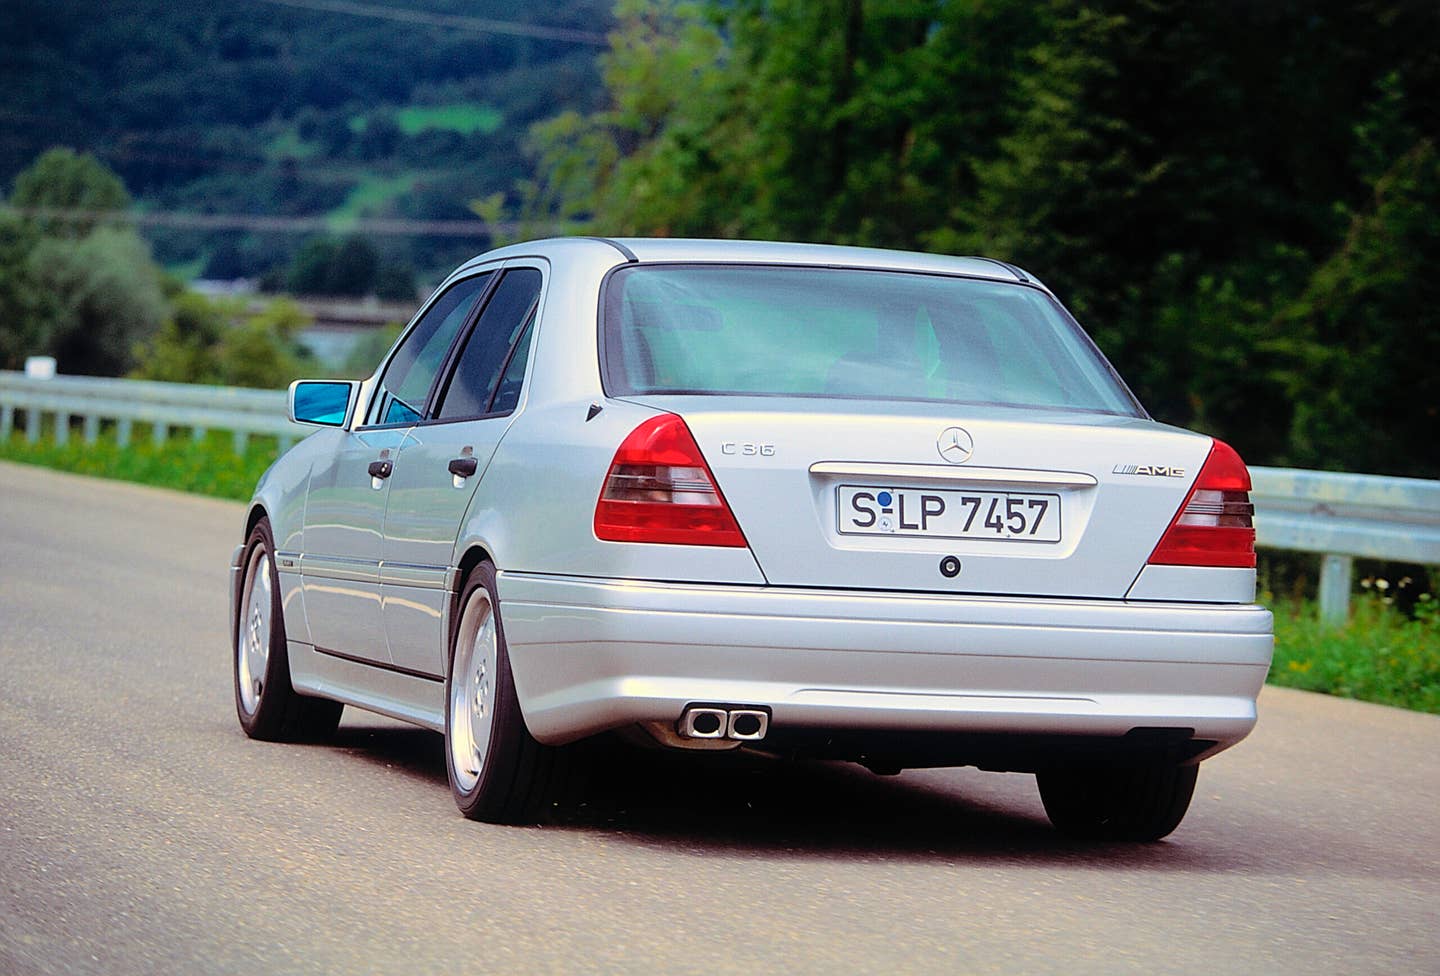 Mercedes-Benz C 36 AMG from model series 202, production period 1993 to 1997. Exterior, driving shot from front left. Photo from 1993.